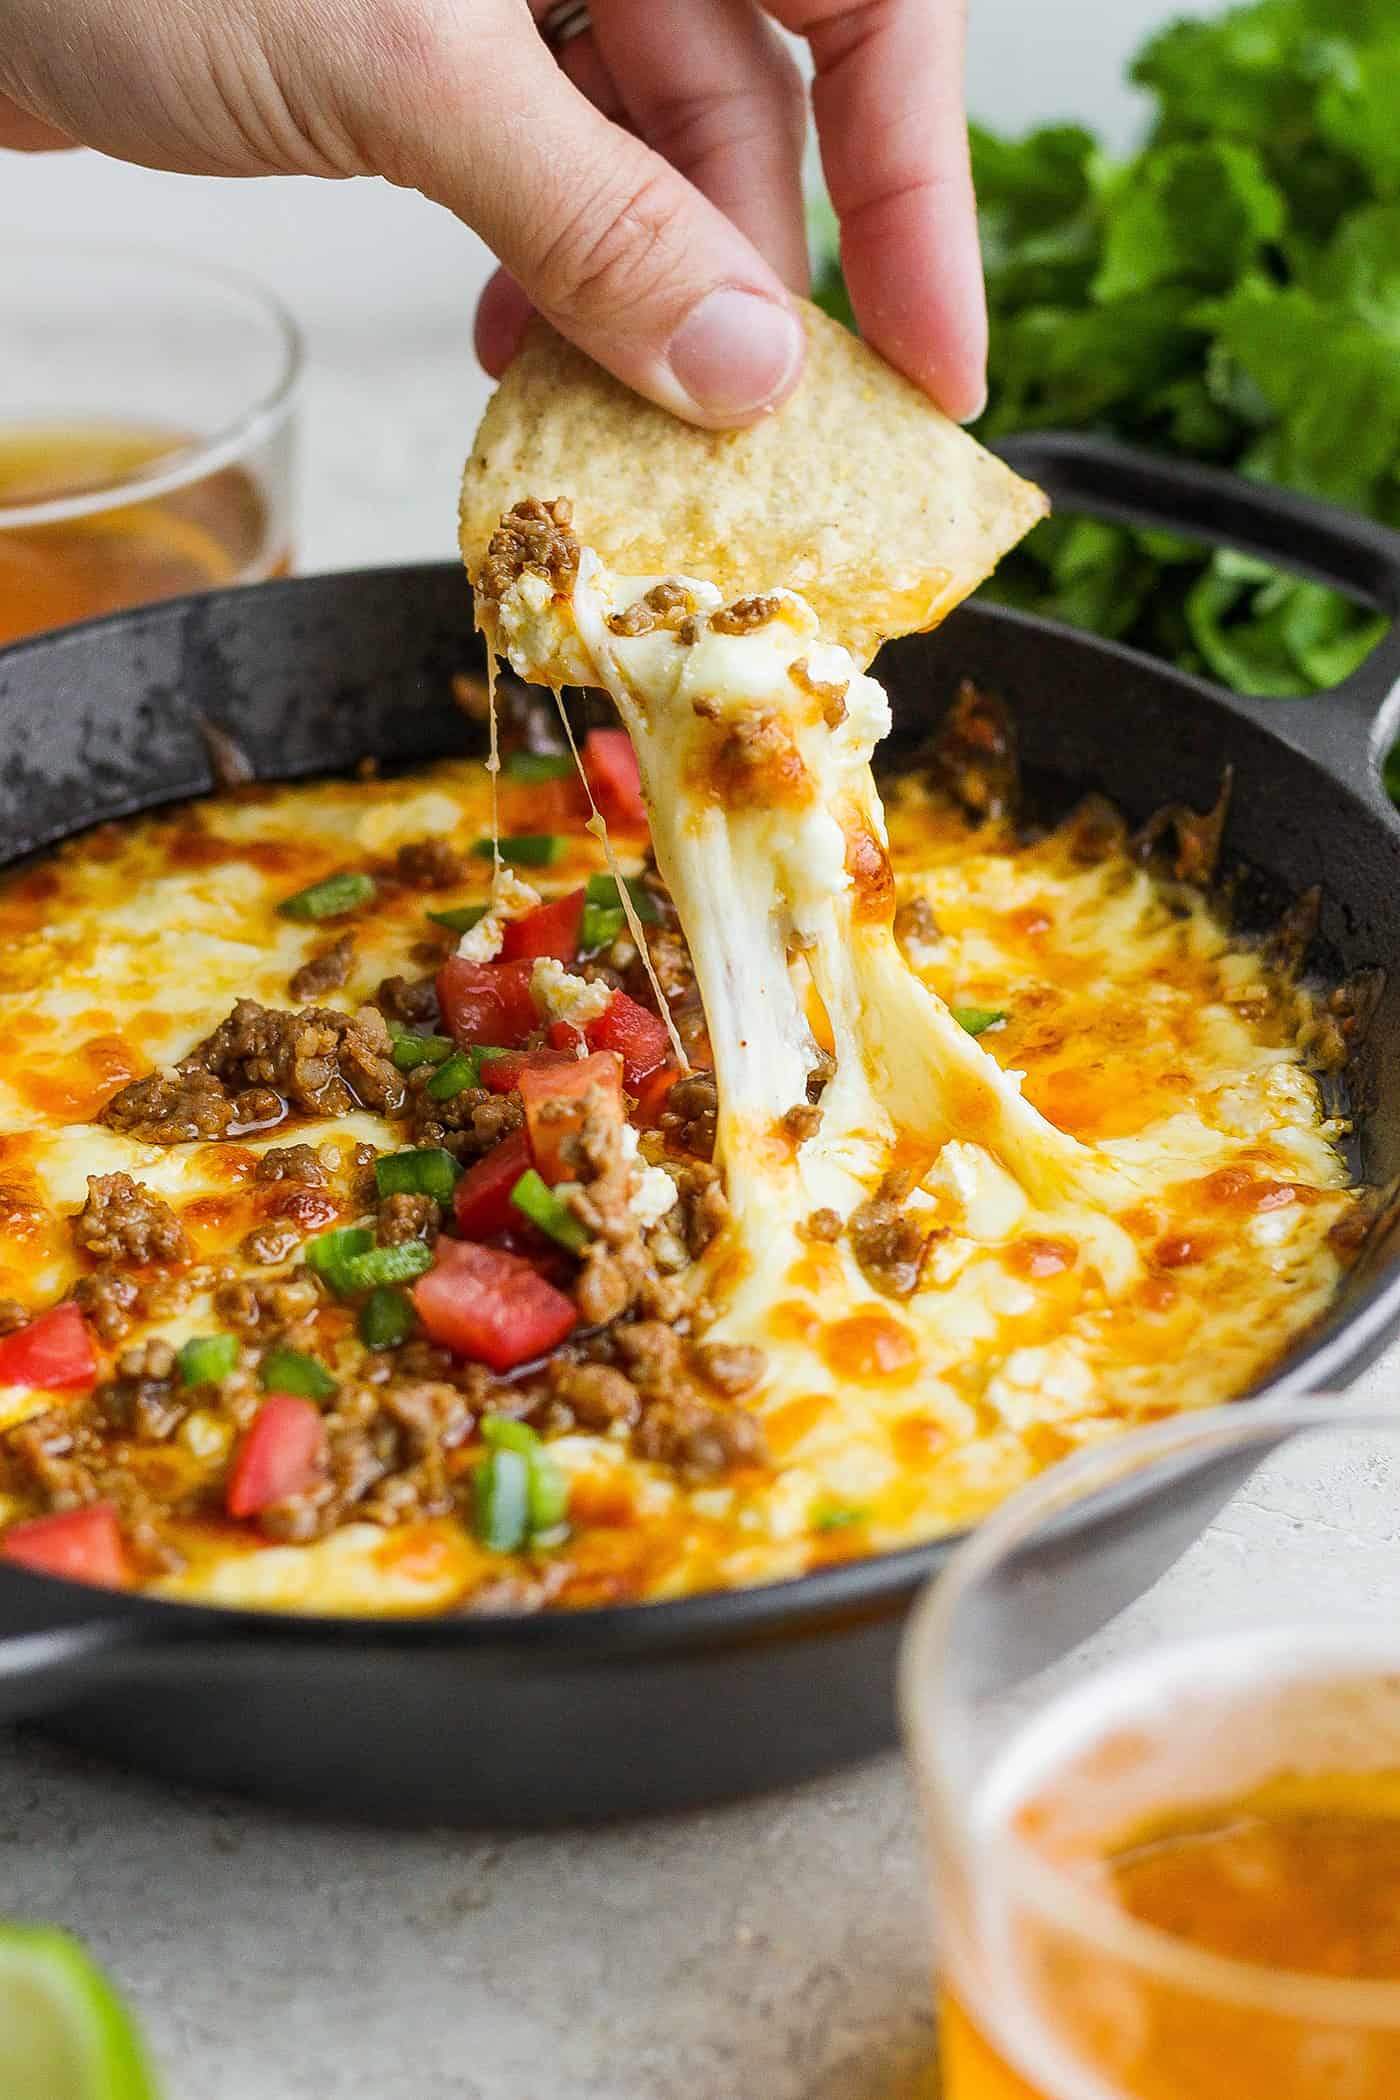 A hand holding a corn chip dips into a bowl of tomato-topped queso fundido with melted cheese and chorizo.